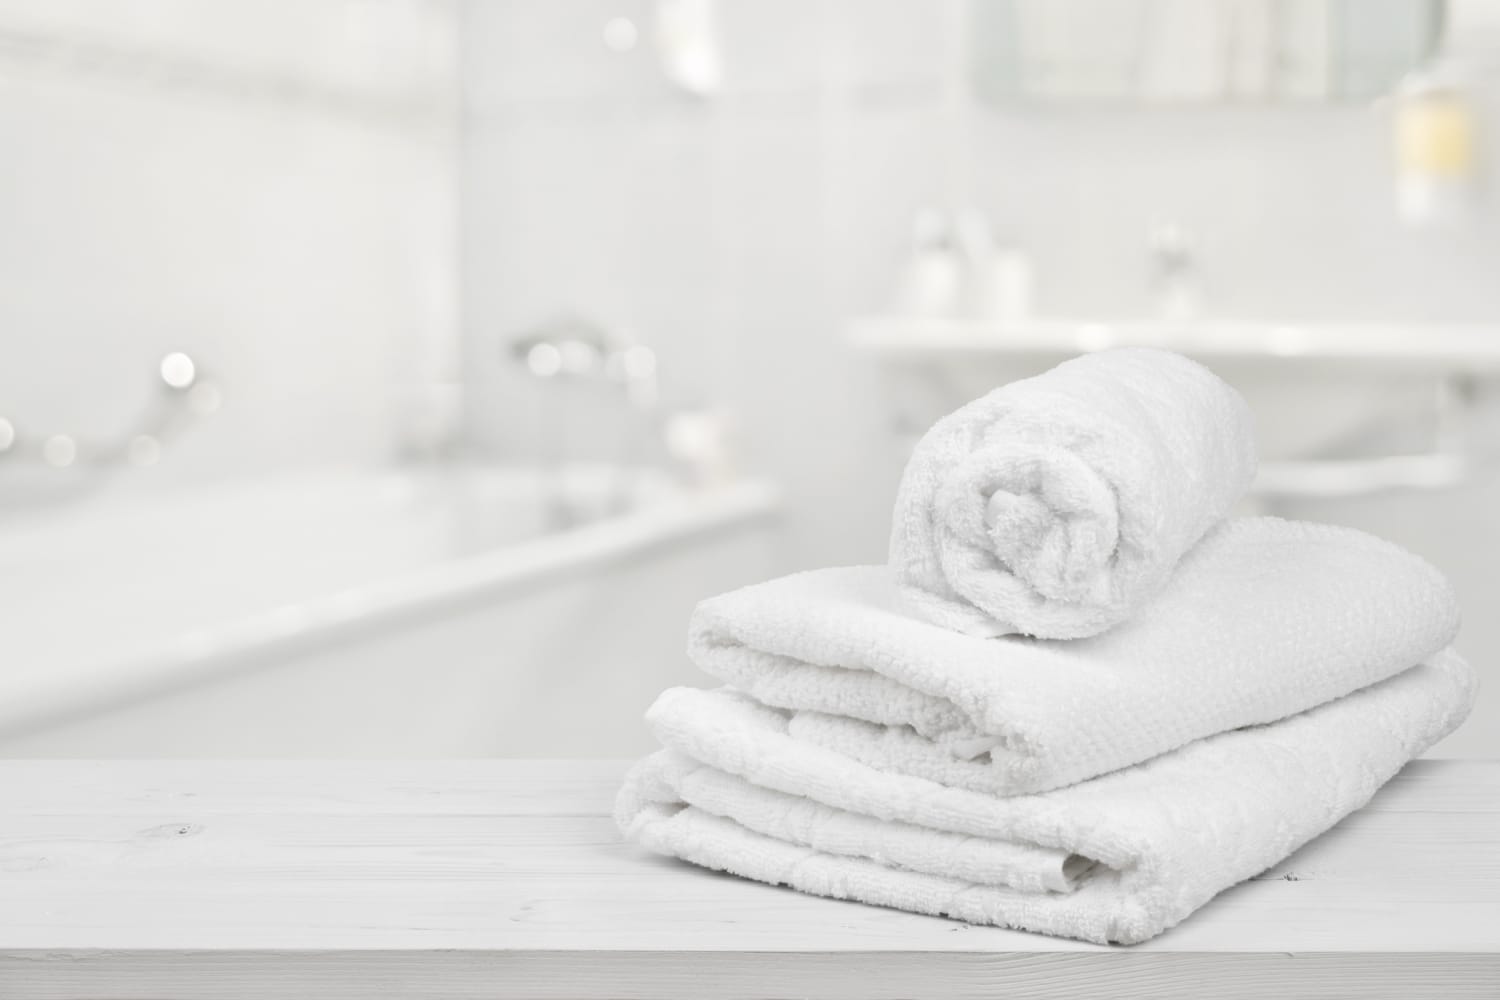 What Can You Steal From Hotels - Toiletries Towels